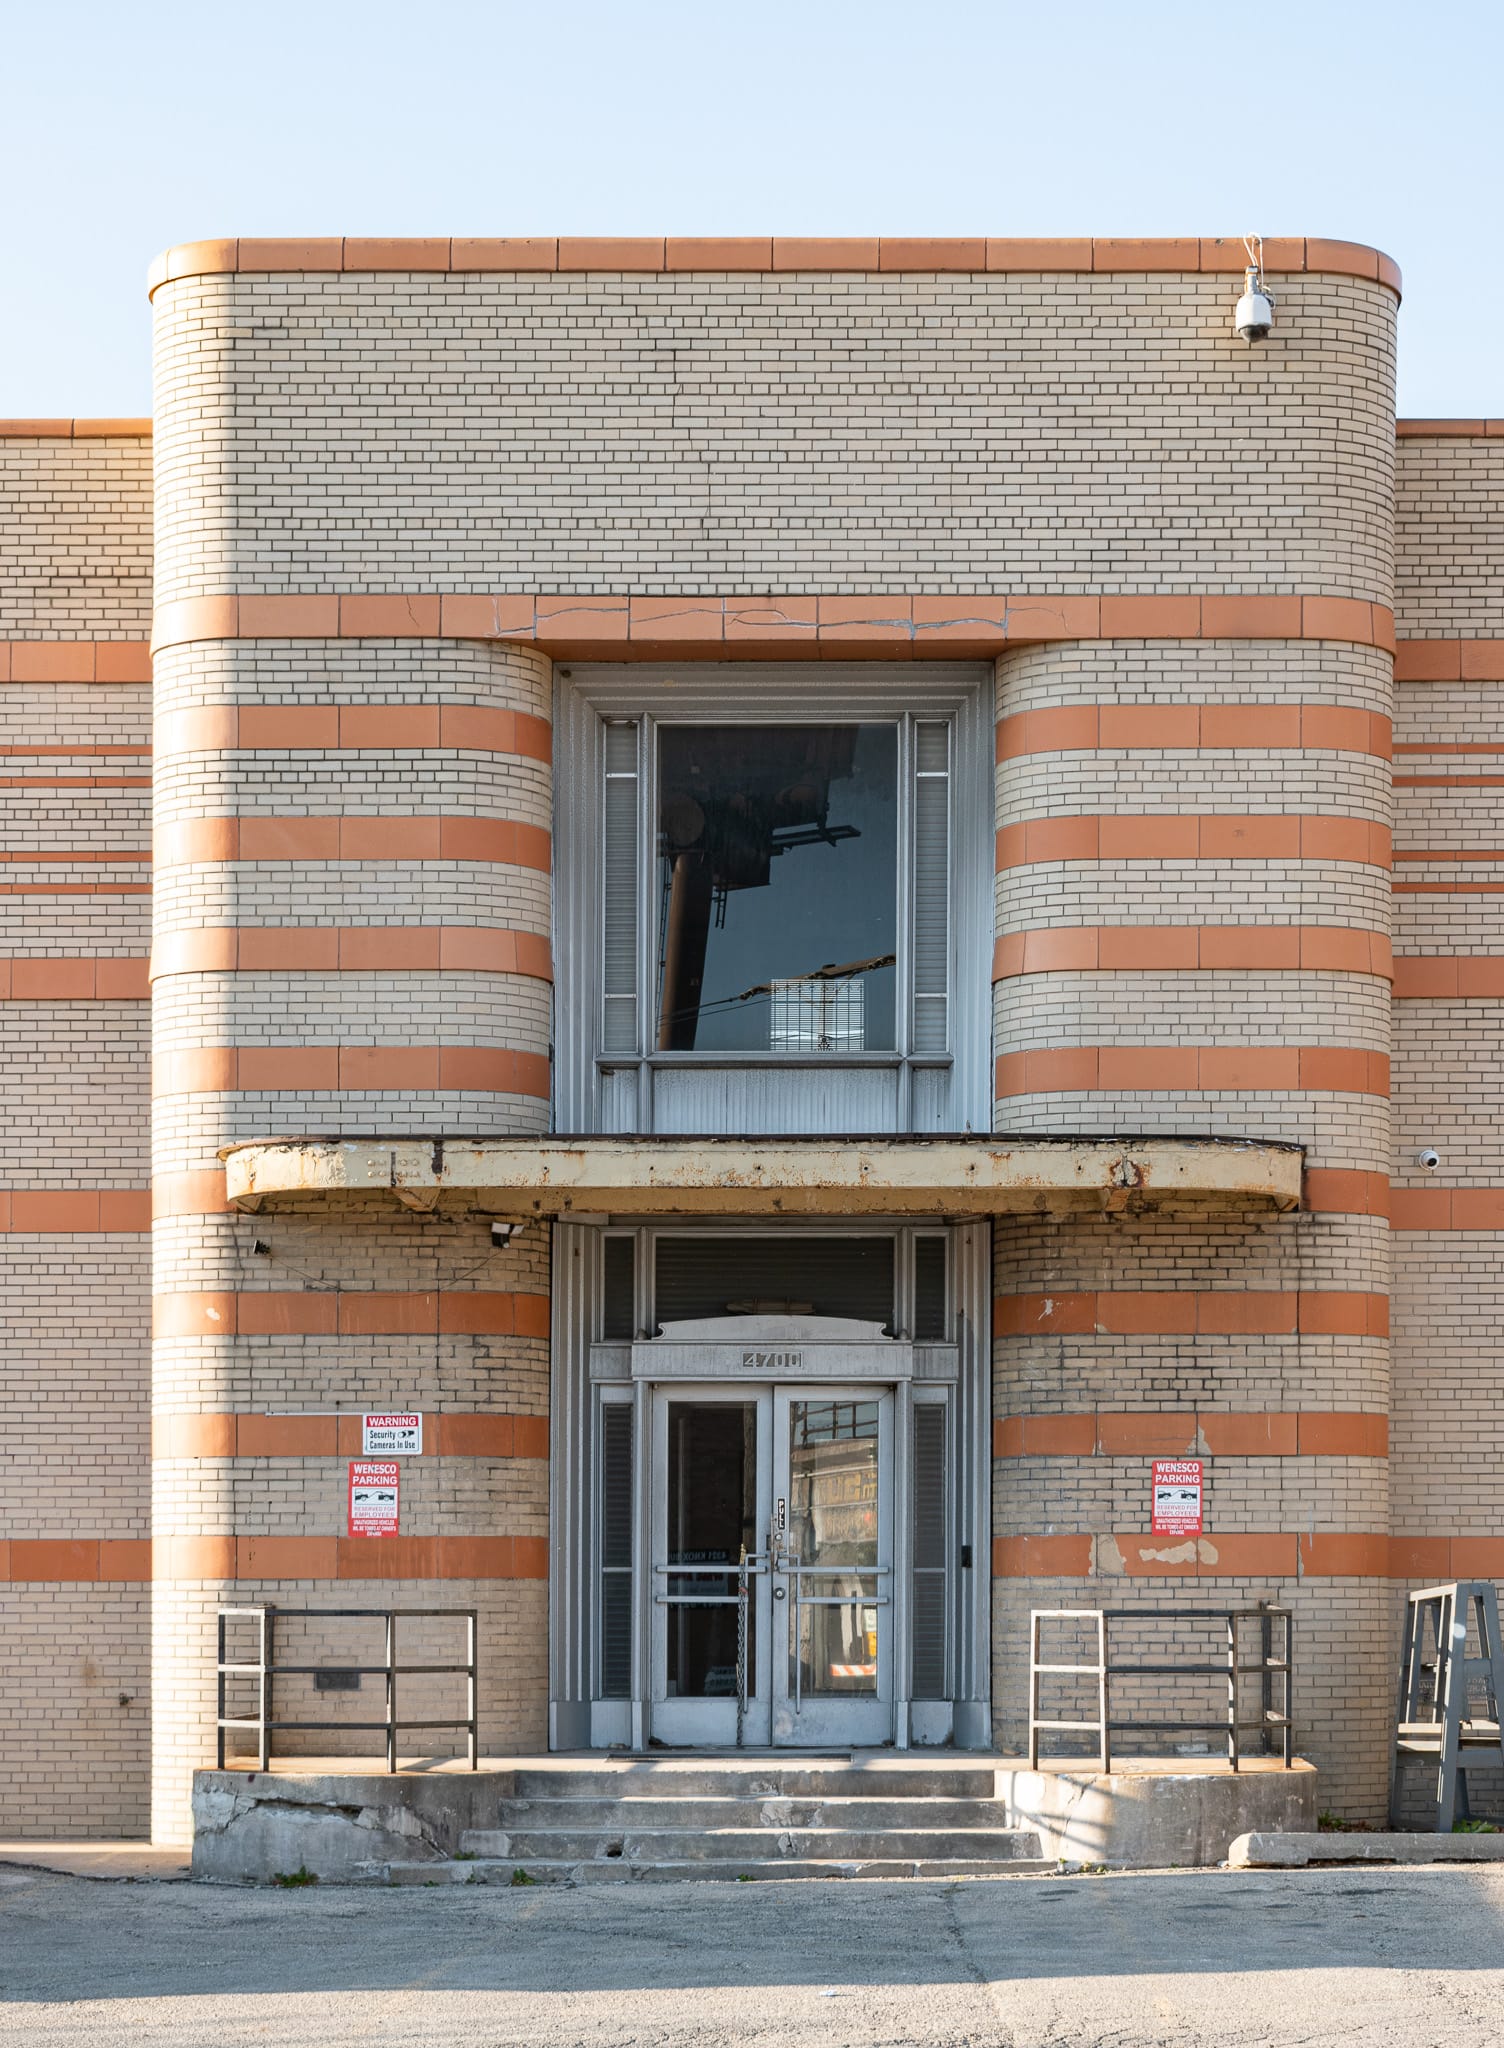 2020 photo of the front entrance with slightly crumbling concrete stairs and a rusting metal canopy. 